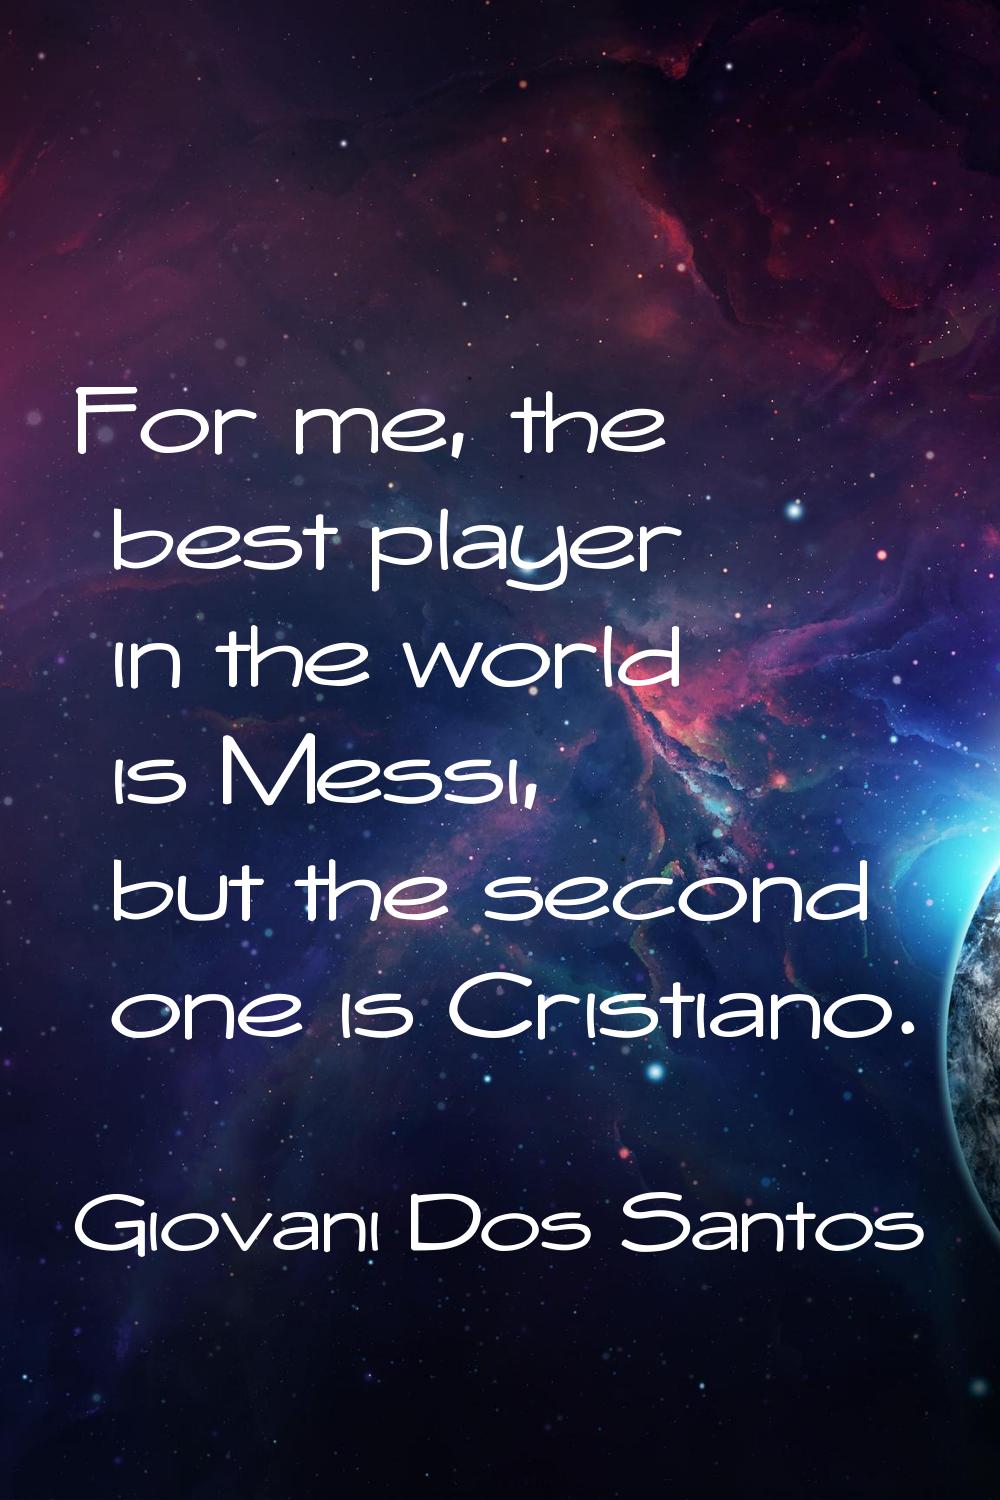 For me, the best player in the world is Messi, but the second one is Cristiano.